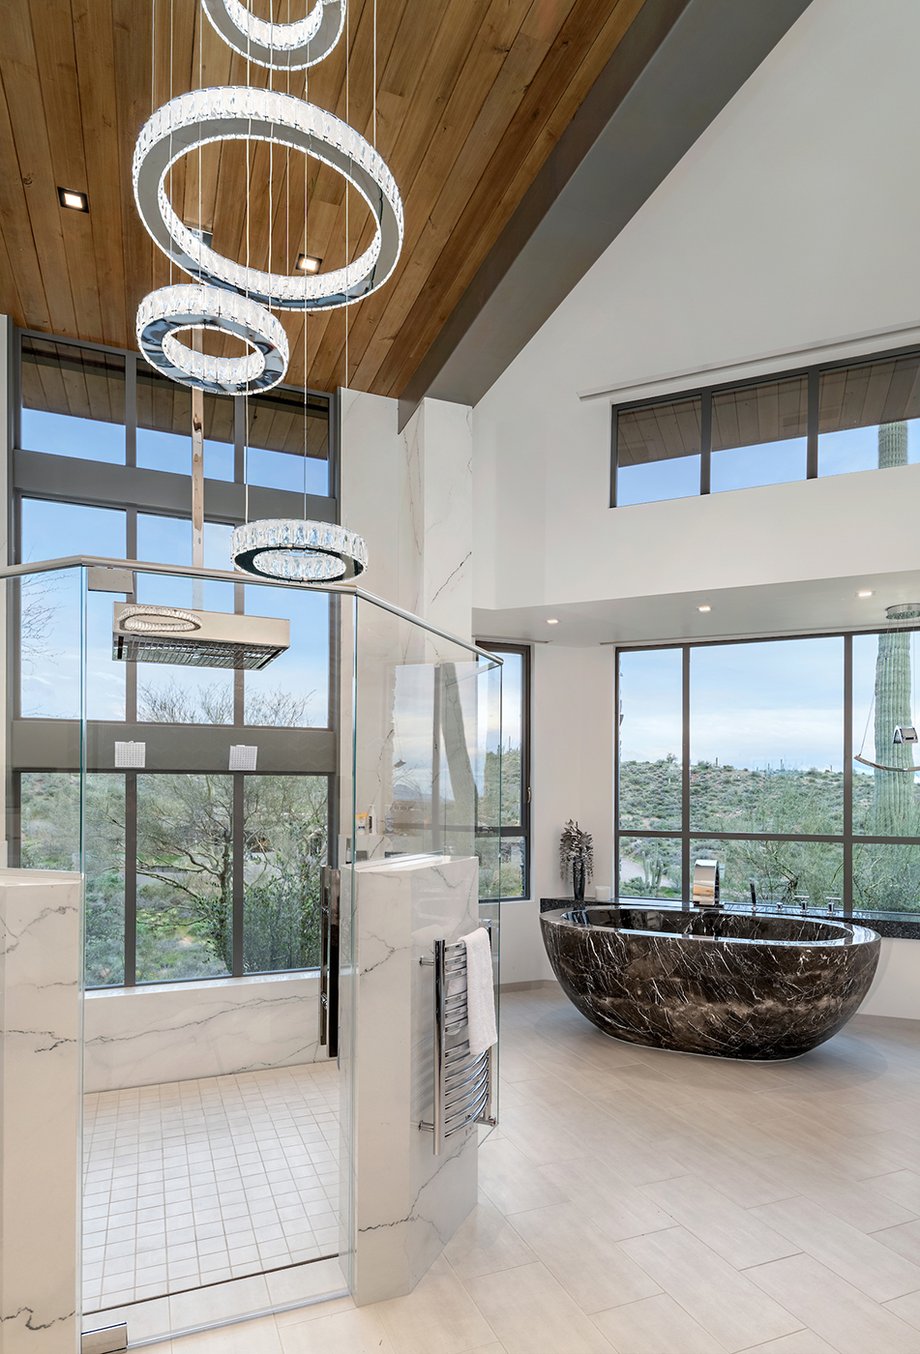 Photo of bathroom from luxury vacation home in Scottsdale, Arizona shot by Michael Duerinckx for Est Est Interior Design. 